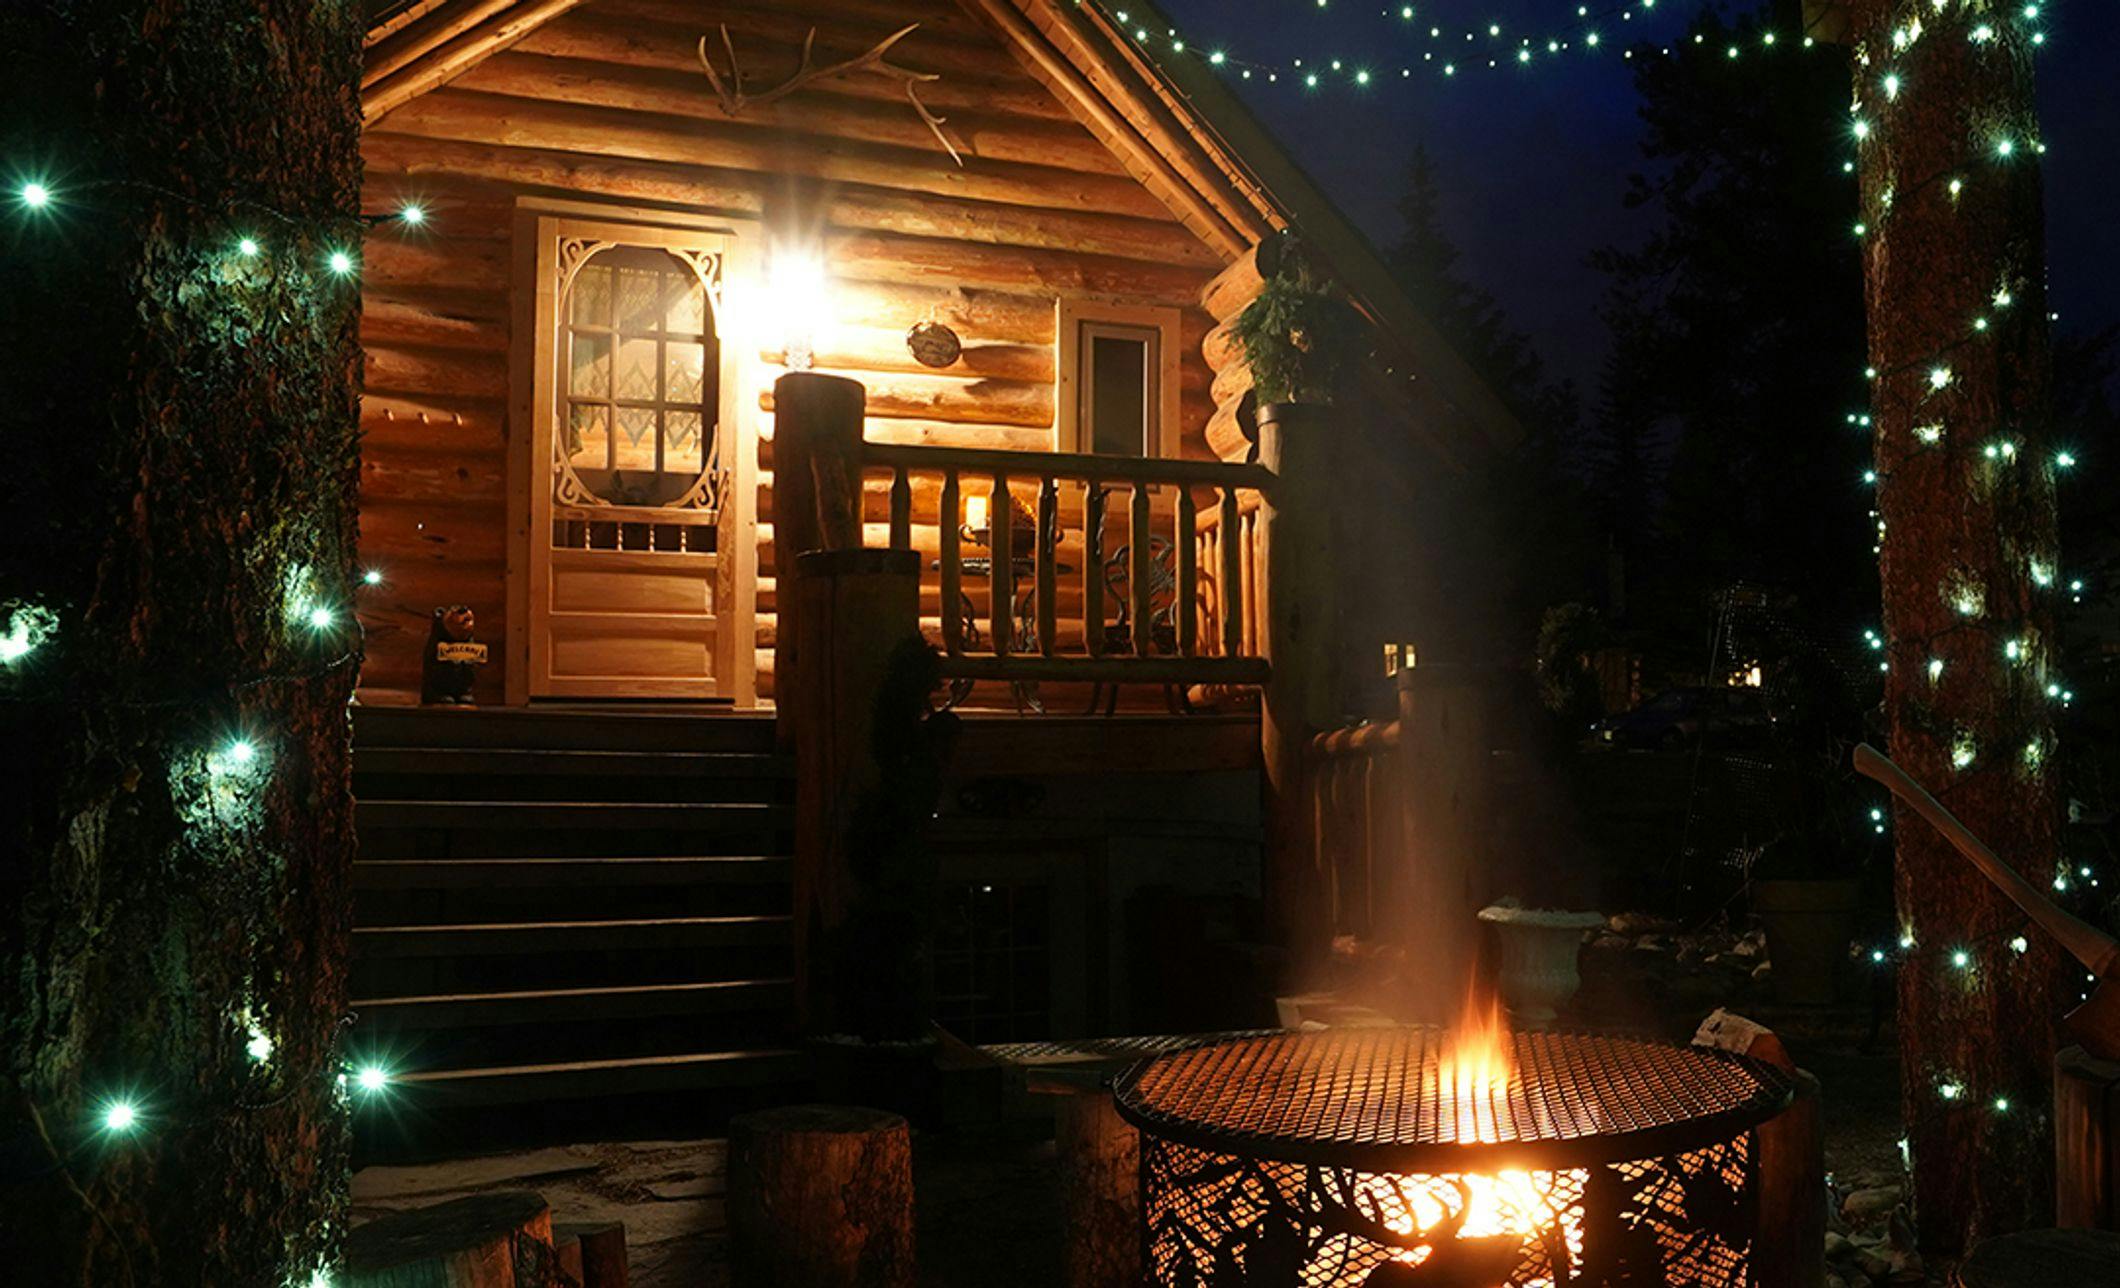 Log cabin with Christmas lights and a burning outdoor fire